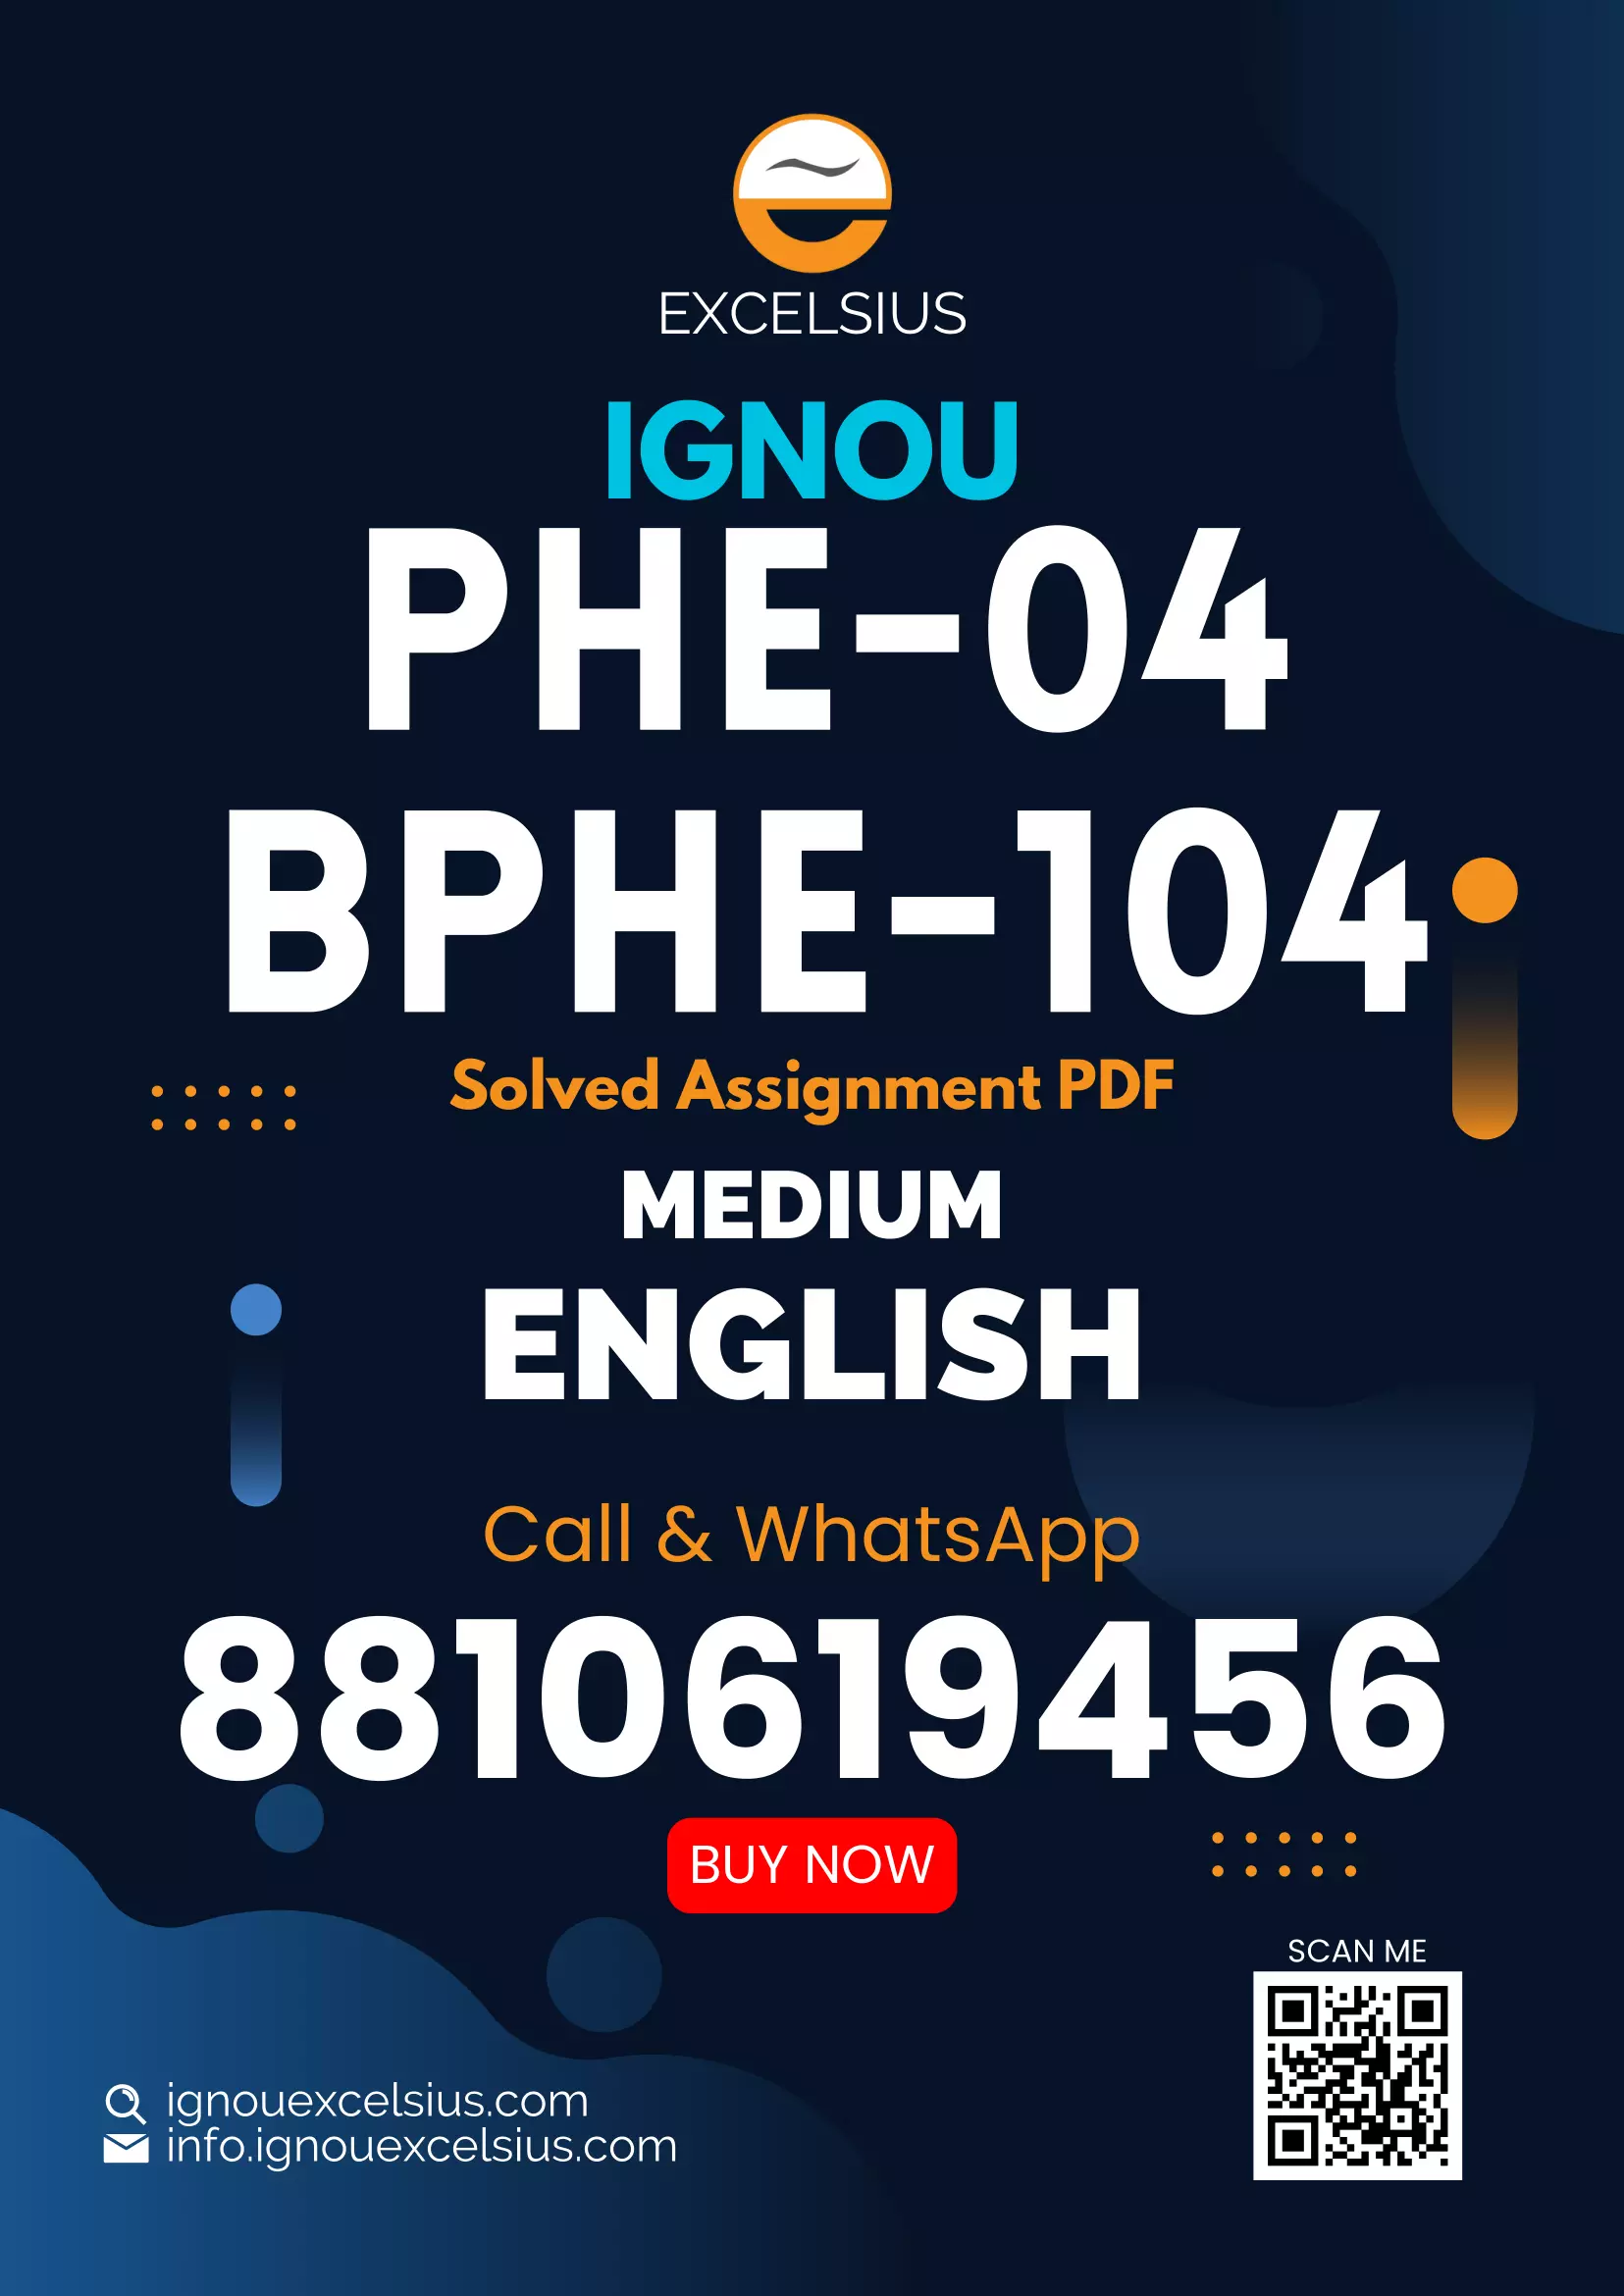 IGNOU BPHE-104/PHE-04 - Mathematical Methods in Physics-I, Latest Solved Assignment-January 2023 - December 2023